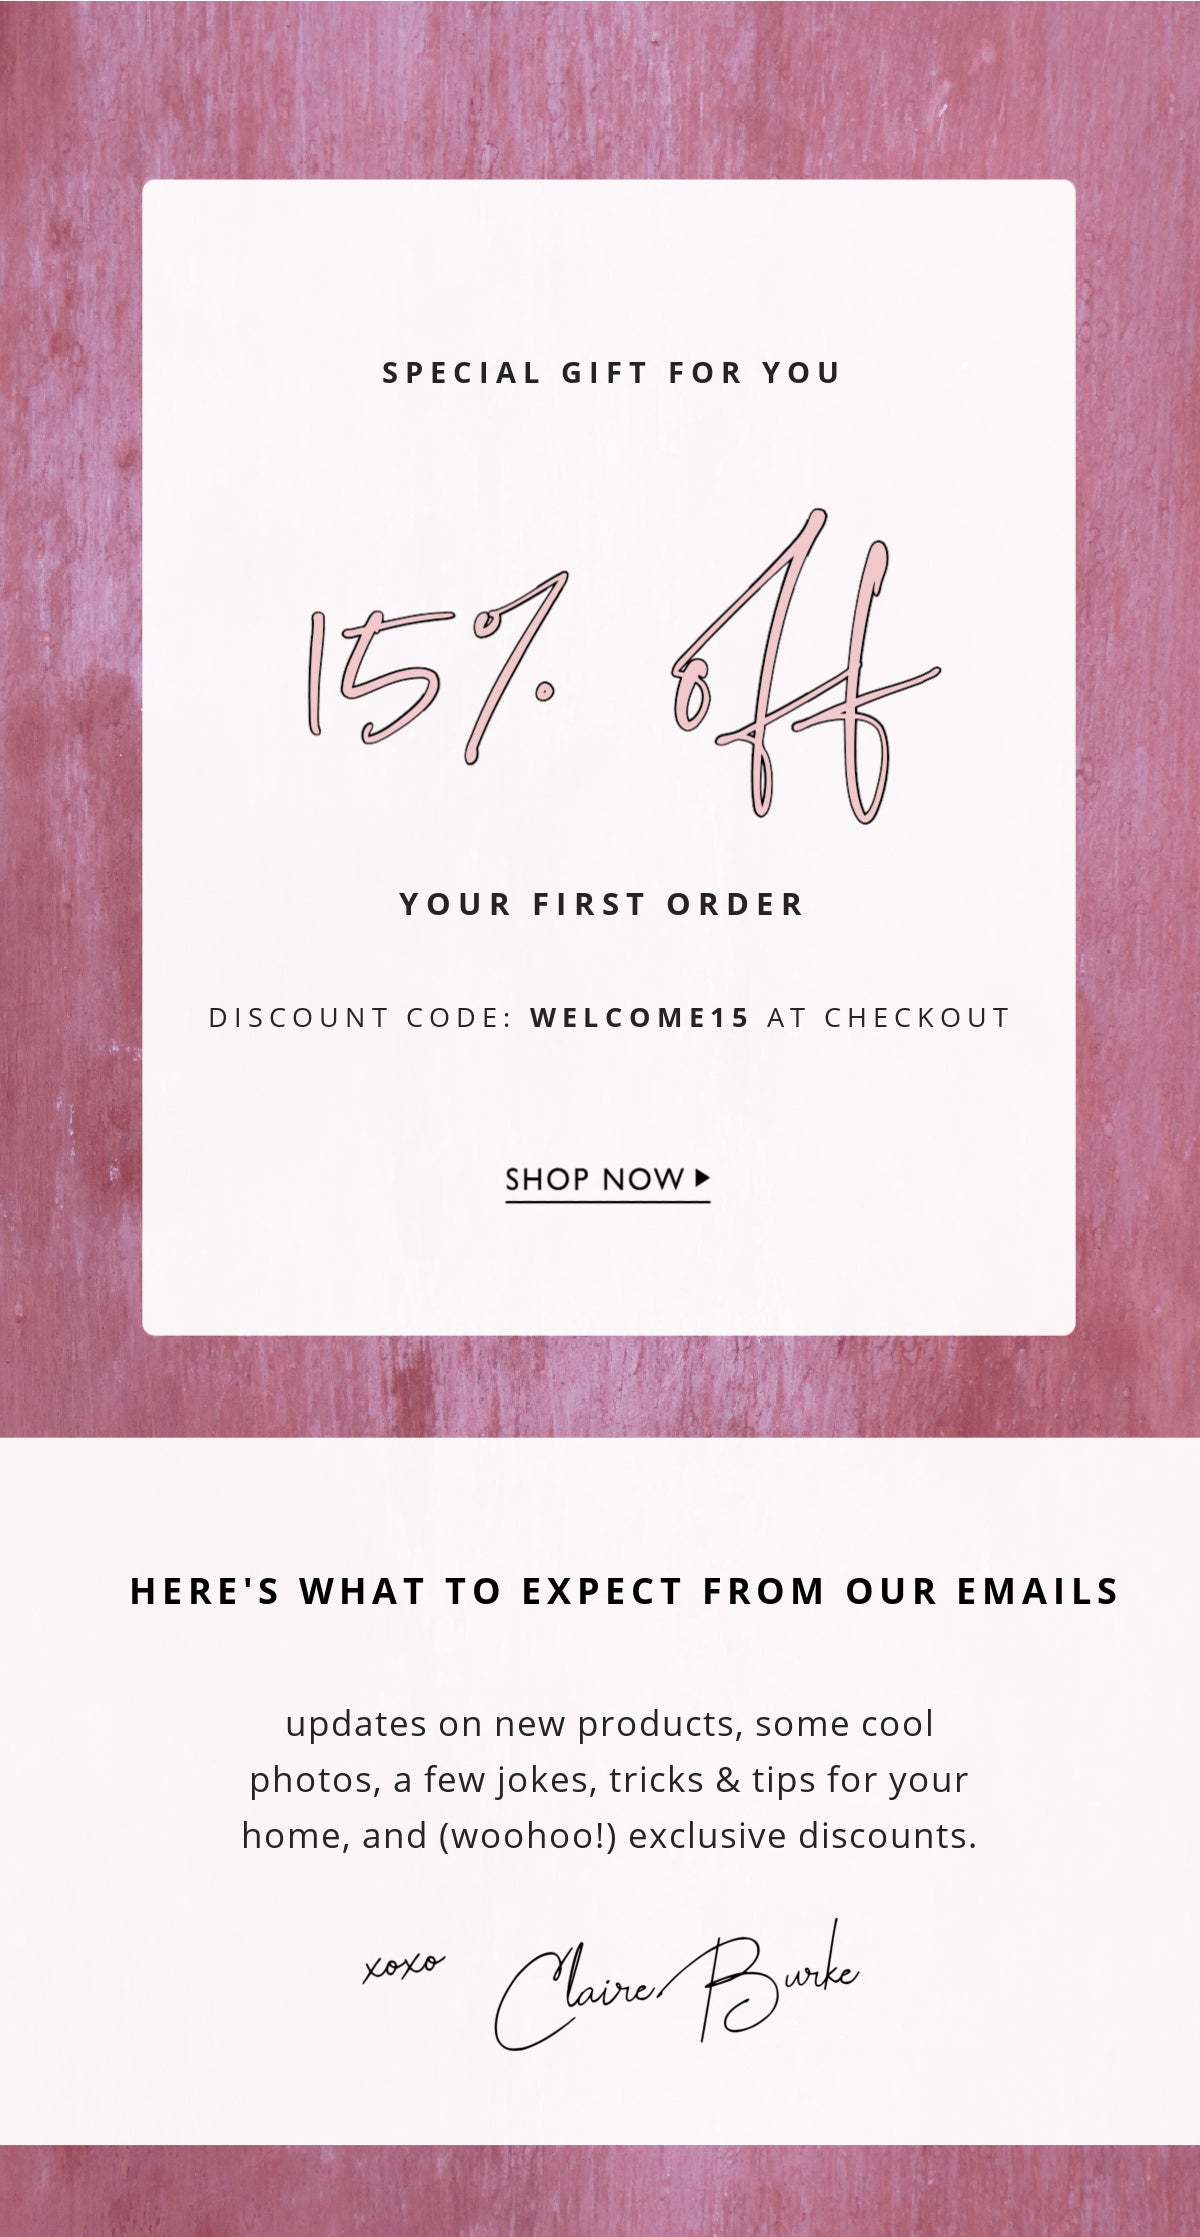 15% Off Your First Order